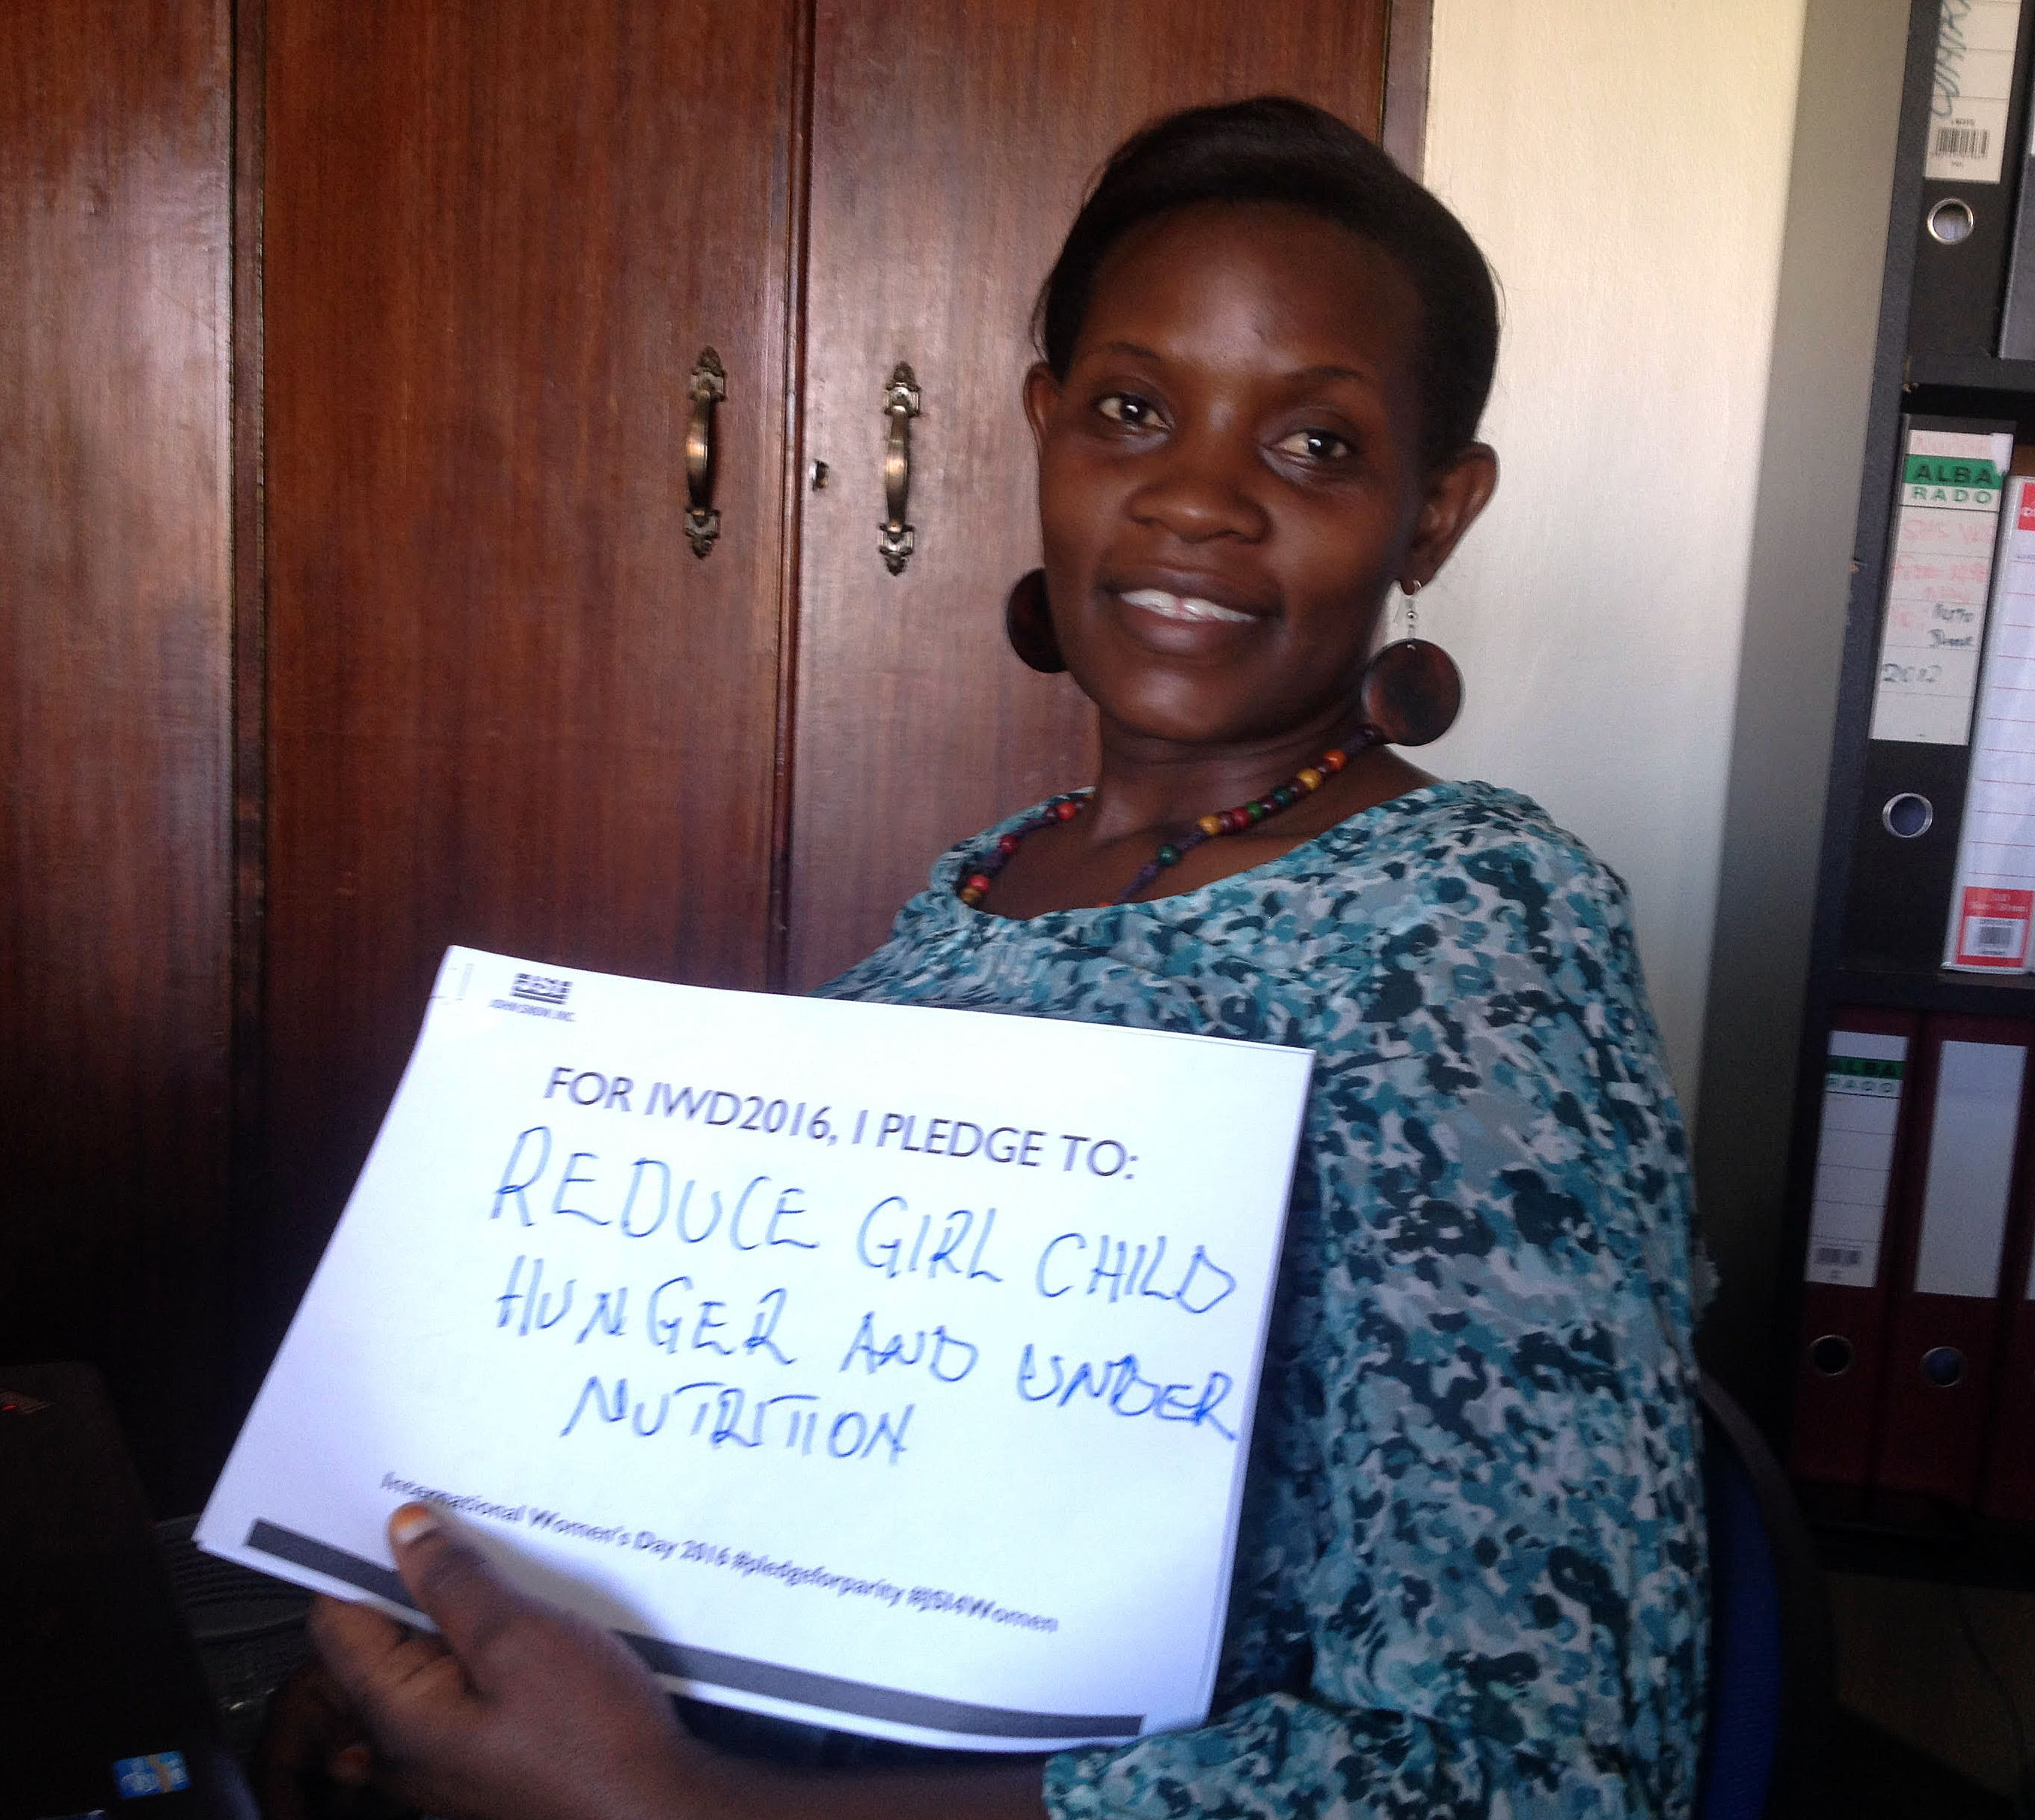 "For IWD ’16, I pledge to reduce girl child hunger and undernutrition"